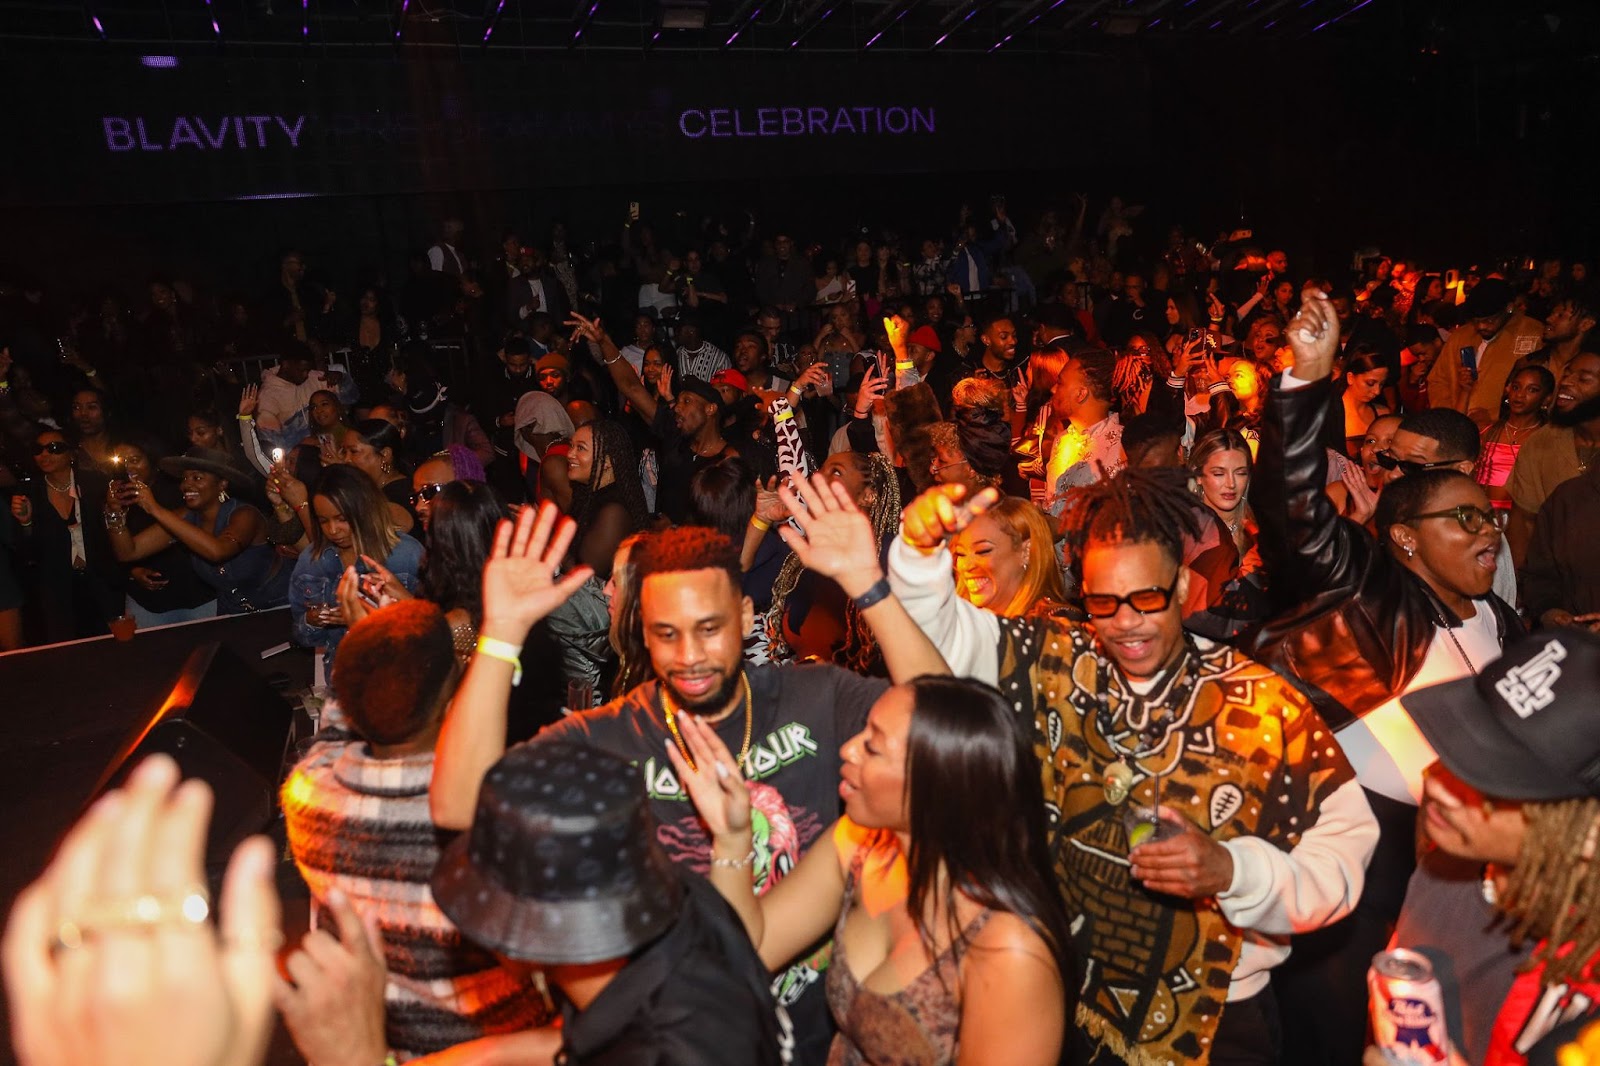 A large crowd of diverse party attendees dancing at Blavity's Music Awards Celebration